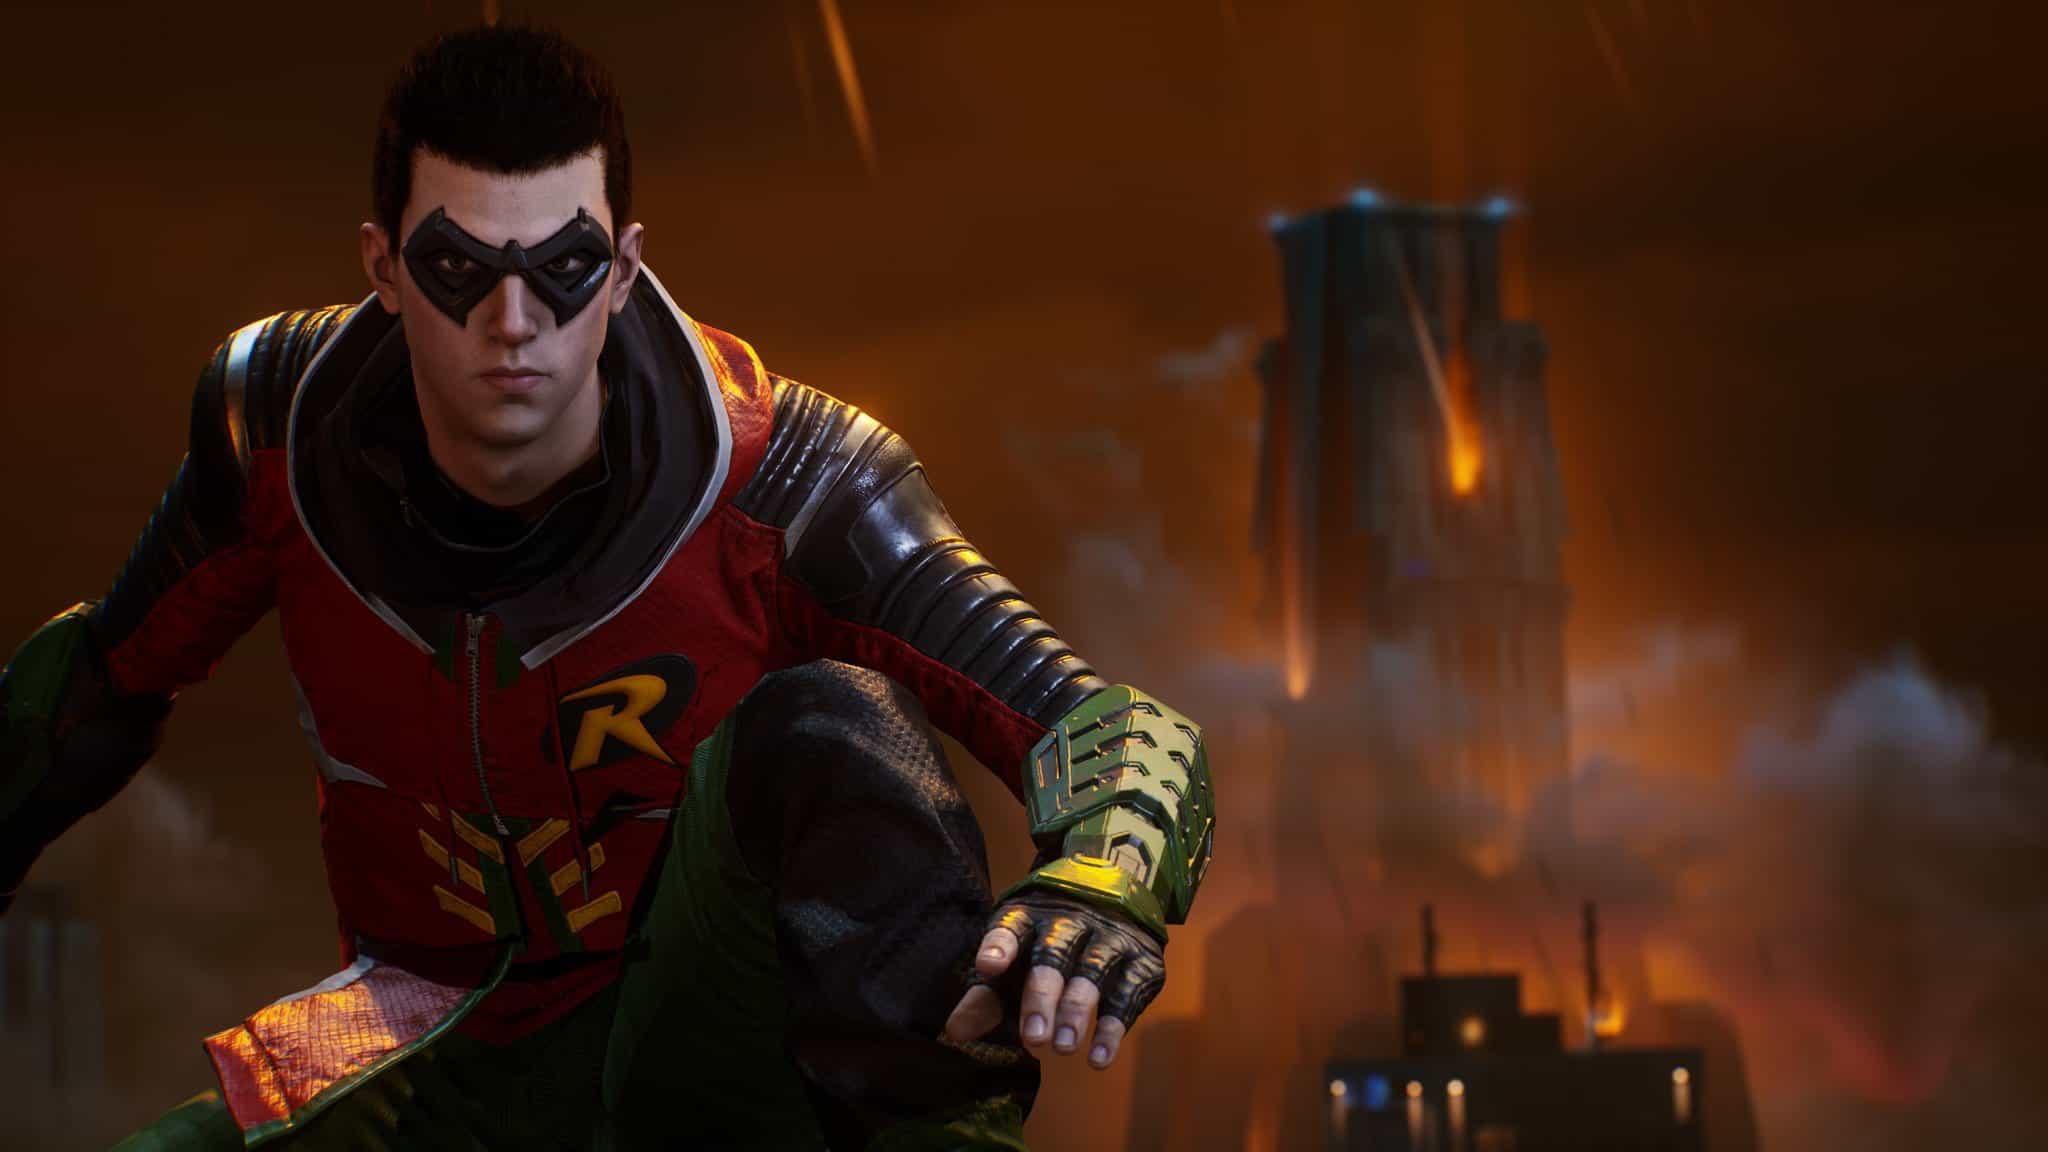 Gotham Knights Update for October 28 Released on Consoles